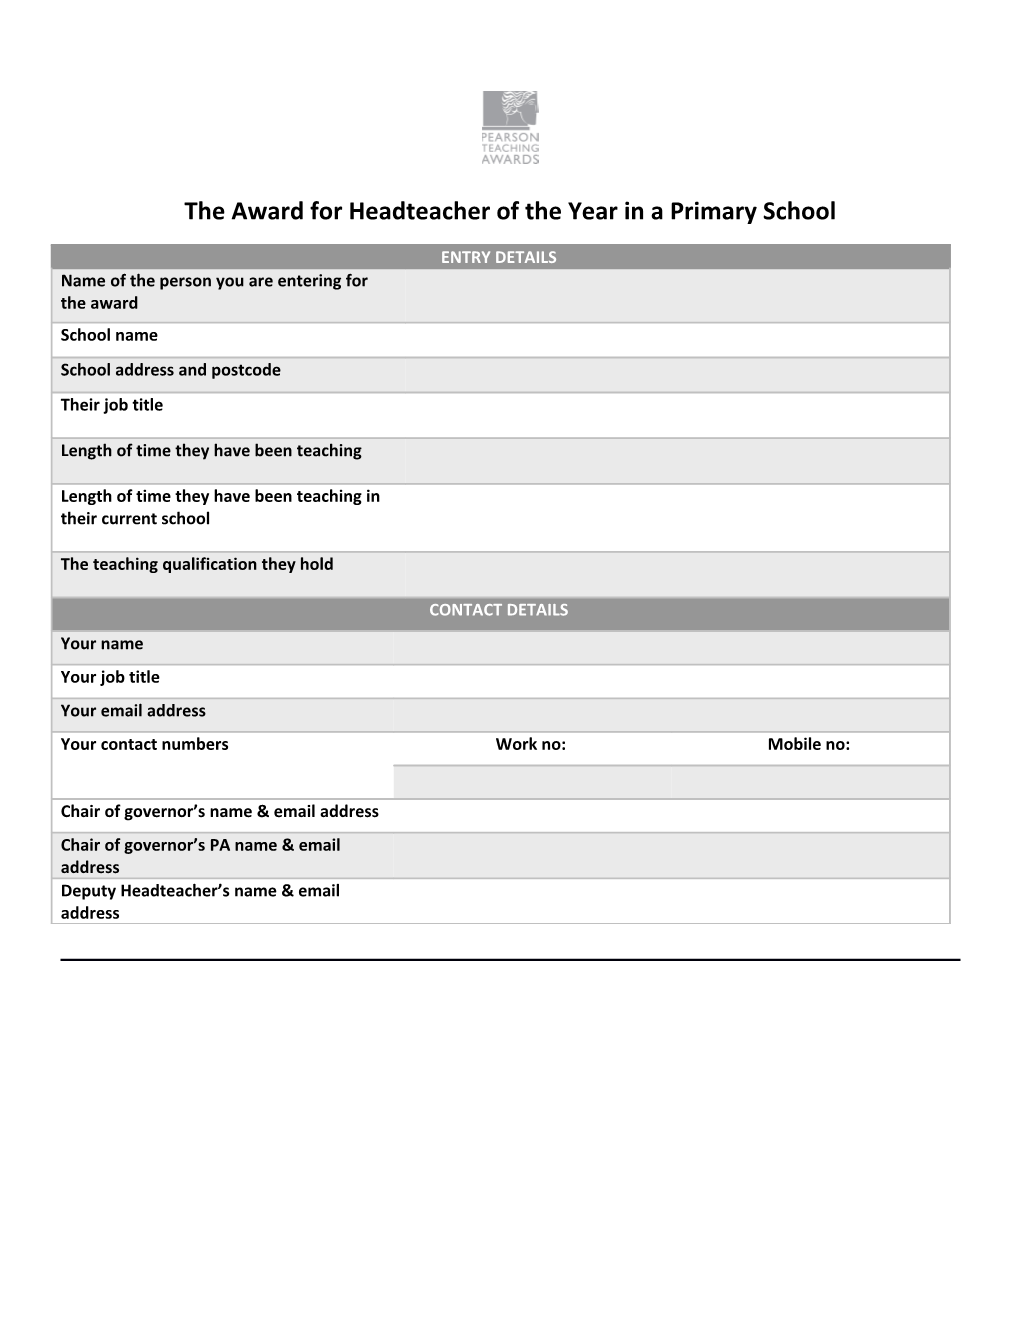 The Award for Headteacher of the Year in a Primary School